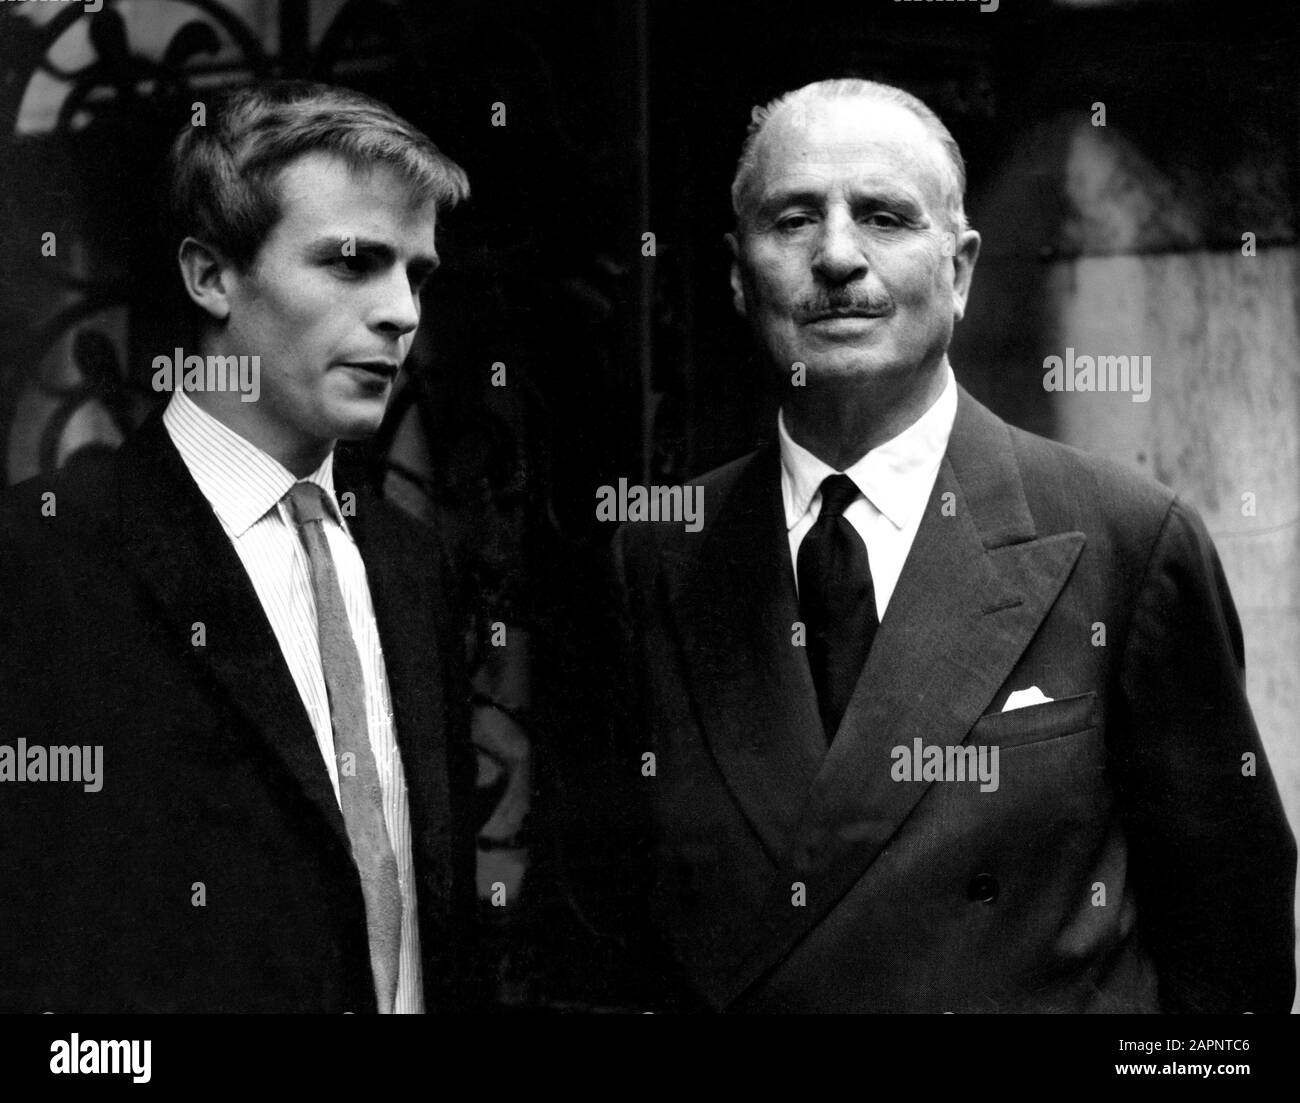 Photo Must Be Credited ©Alpha Press 050000 11/09/1962 Sir Oswald Mosley and Son Max Mosley taken away from the precincts of the court. Stock Photo